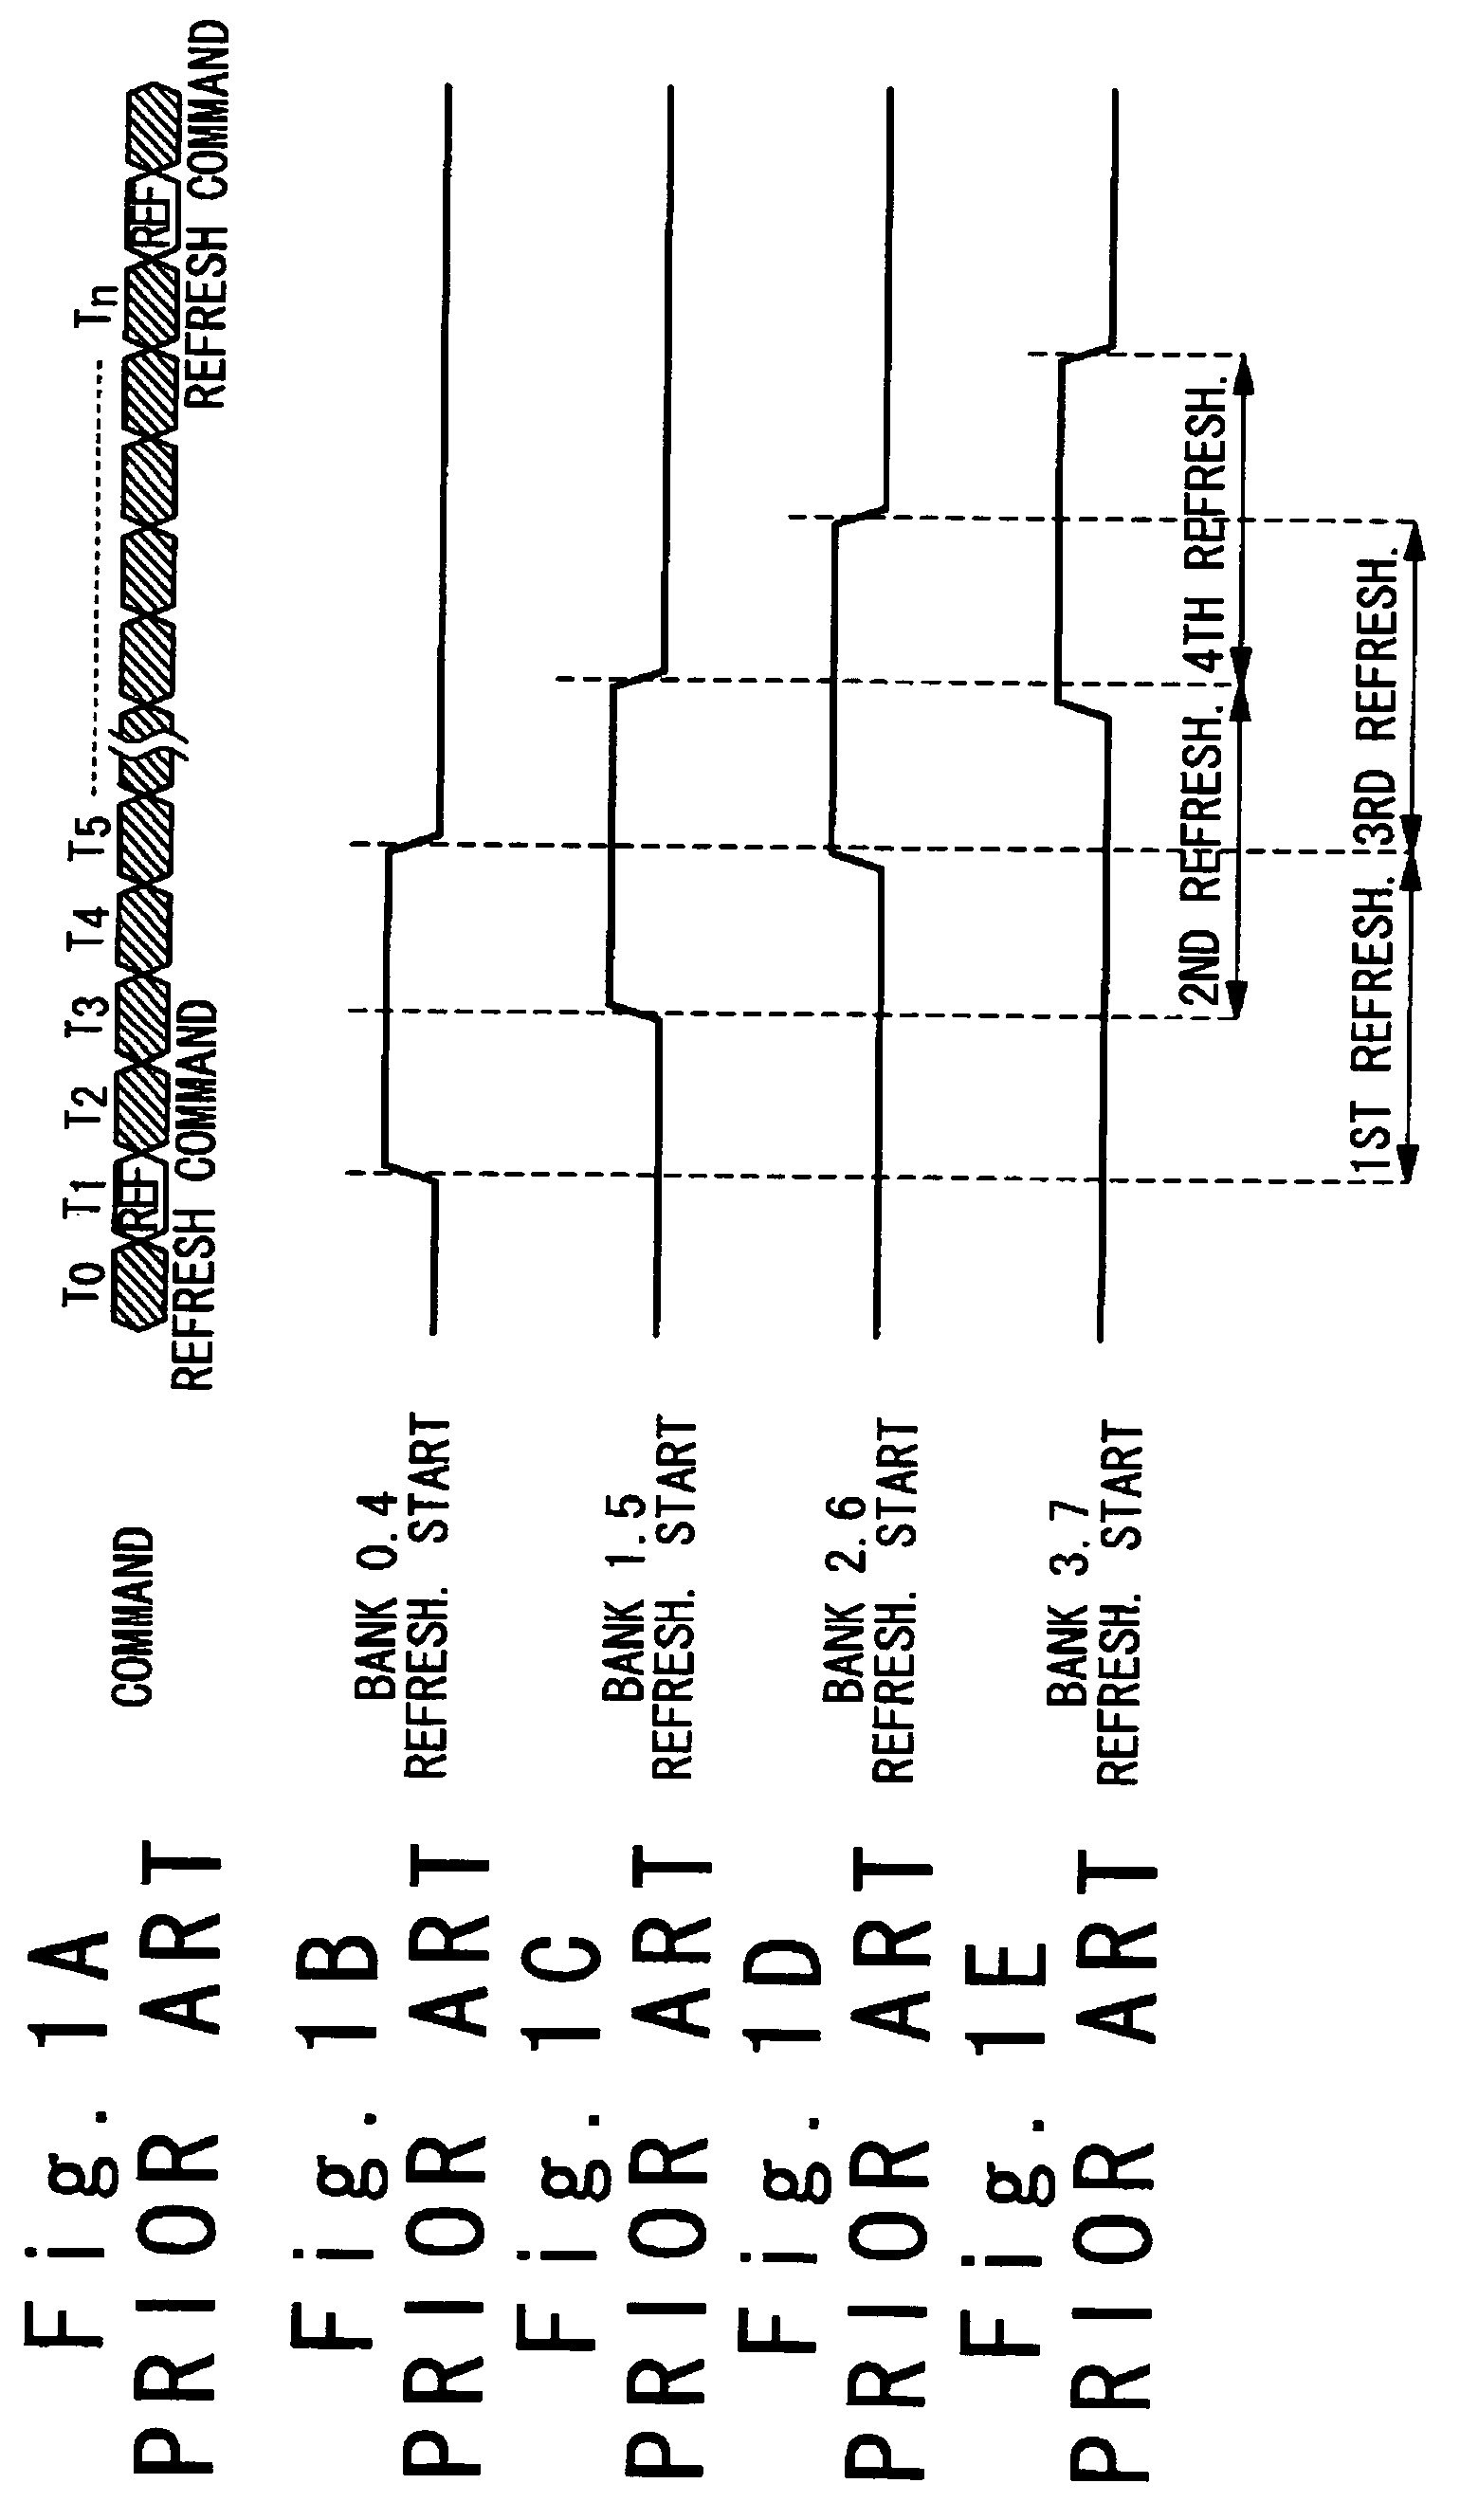 Semiconductor memory device with refreshment control